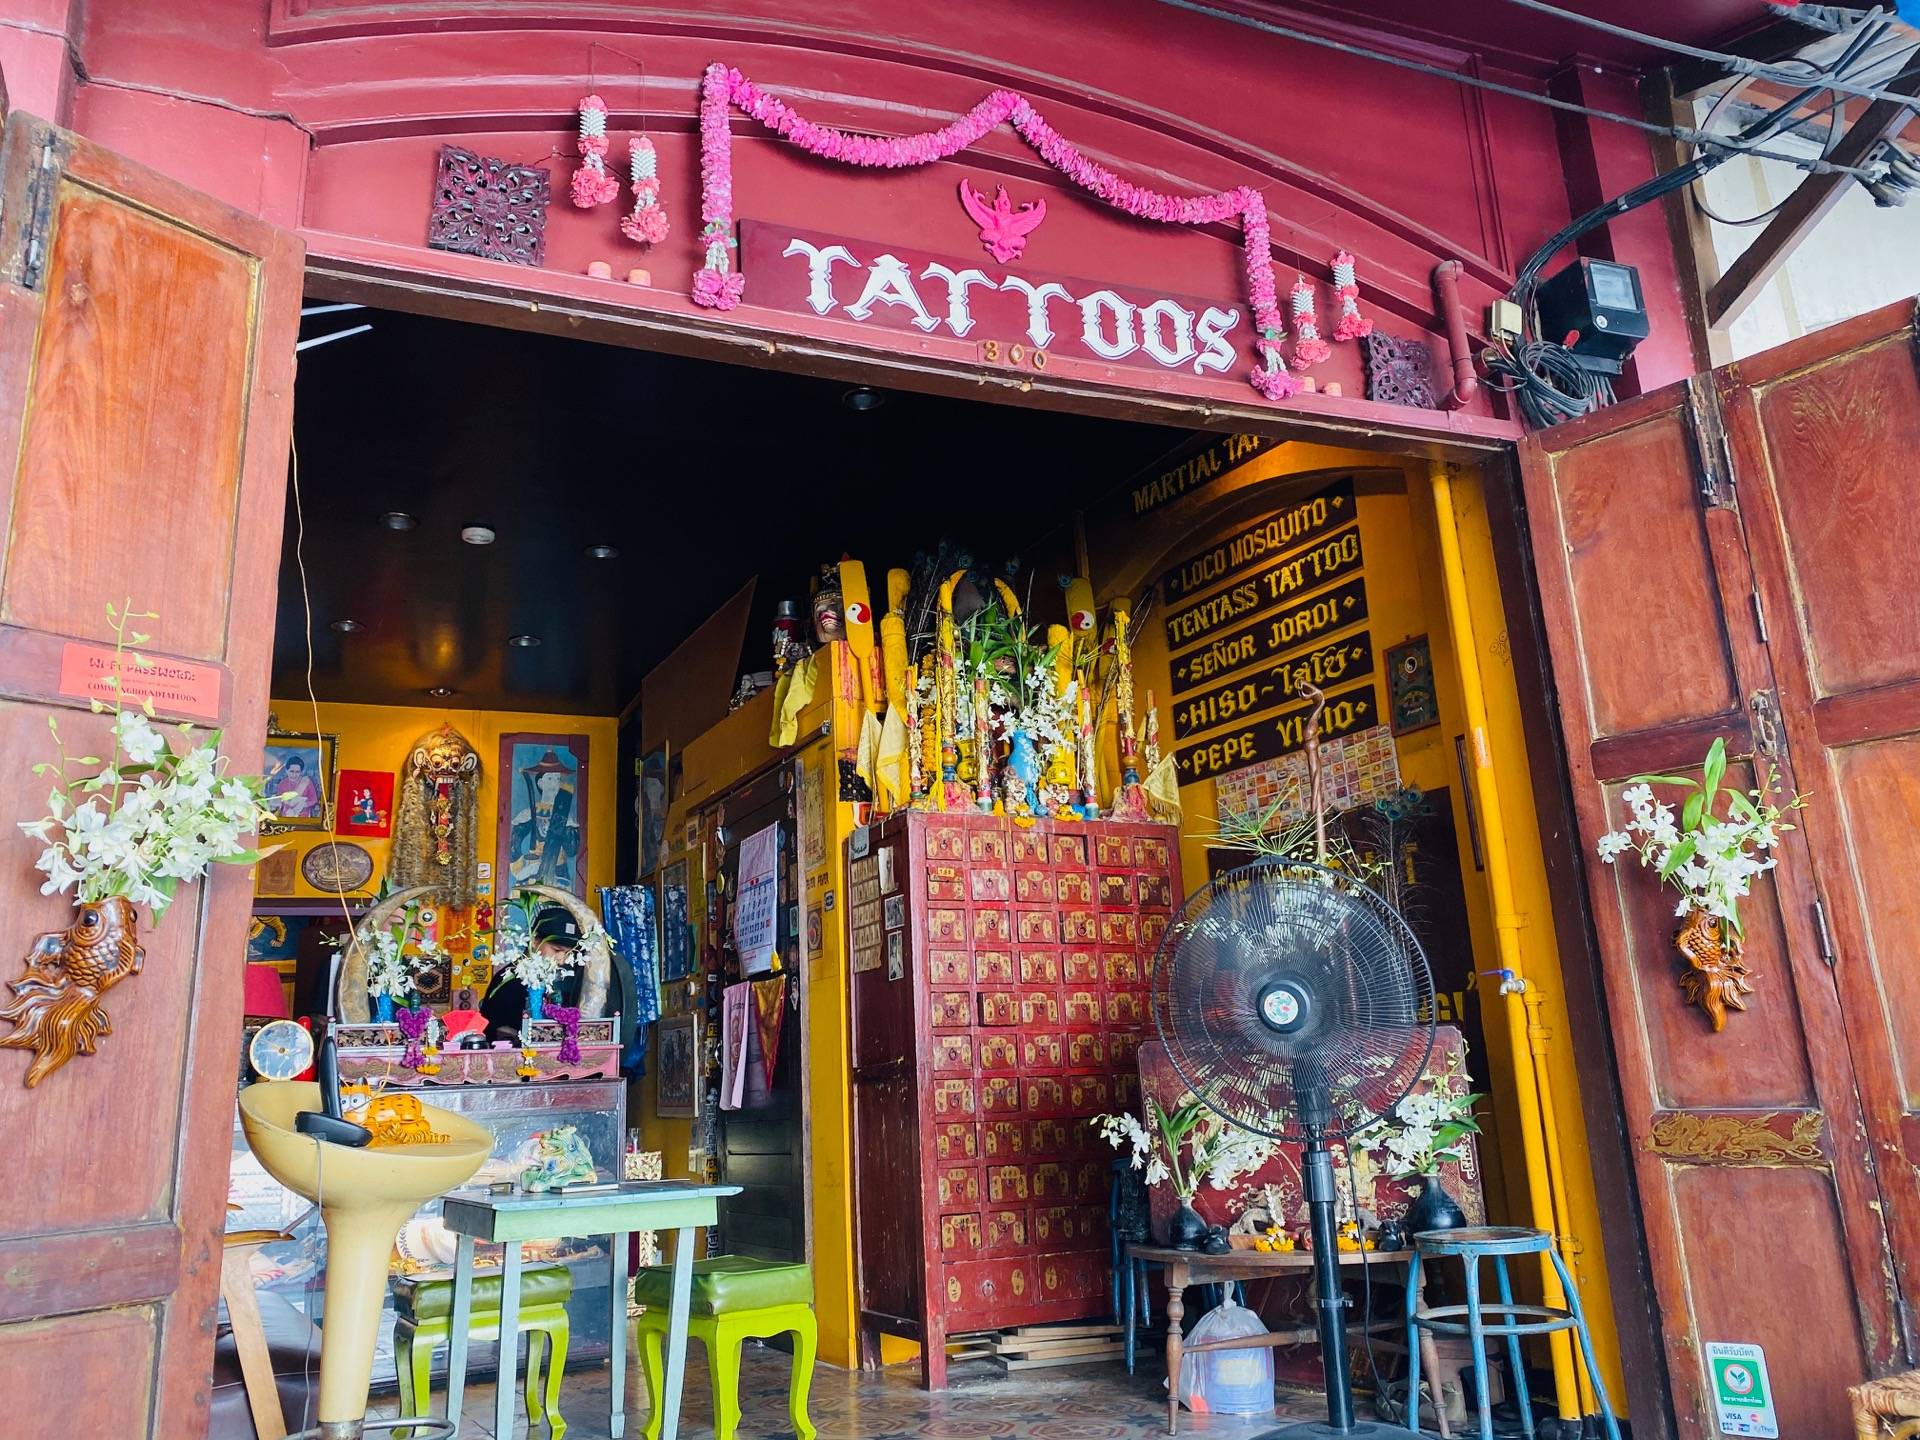 You won't immediately notice this is a tattoo parlor when walking by. 